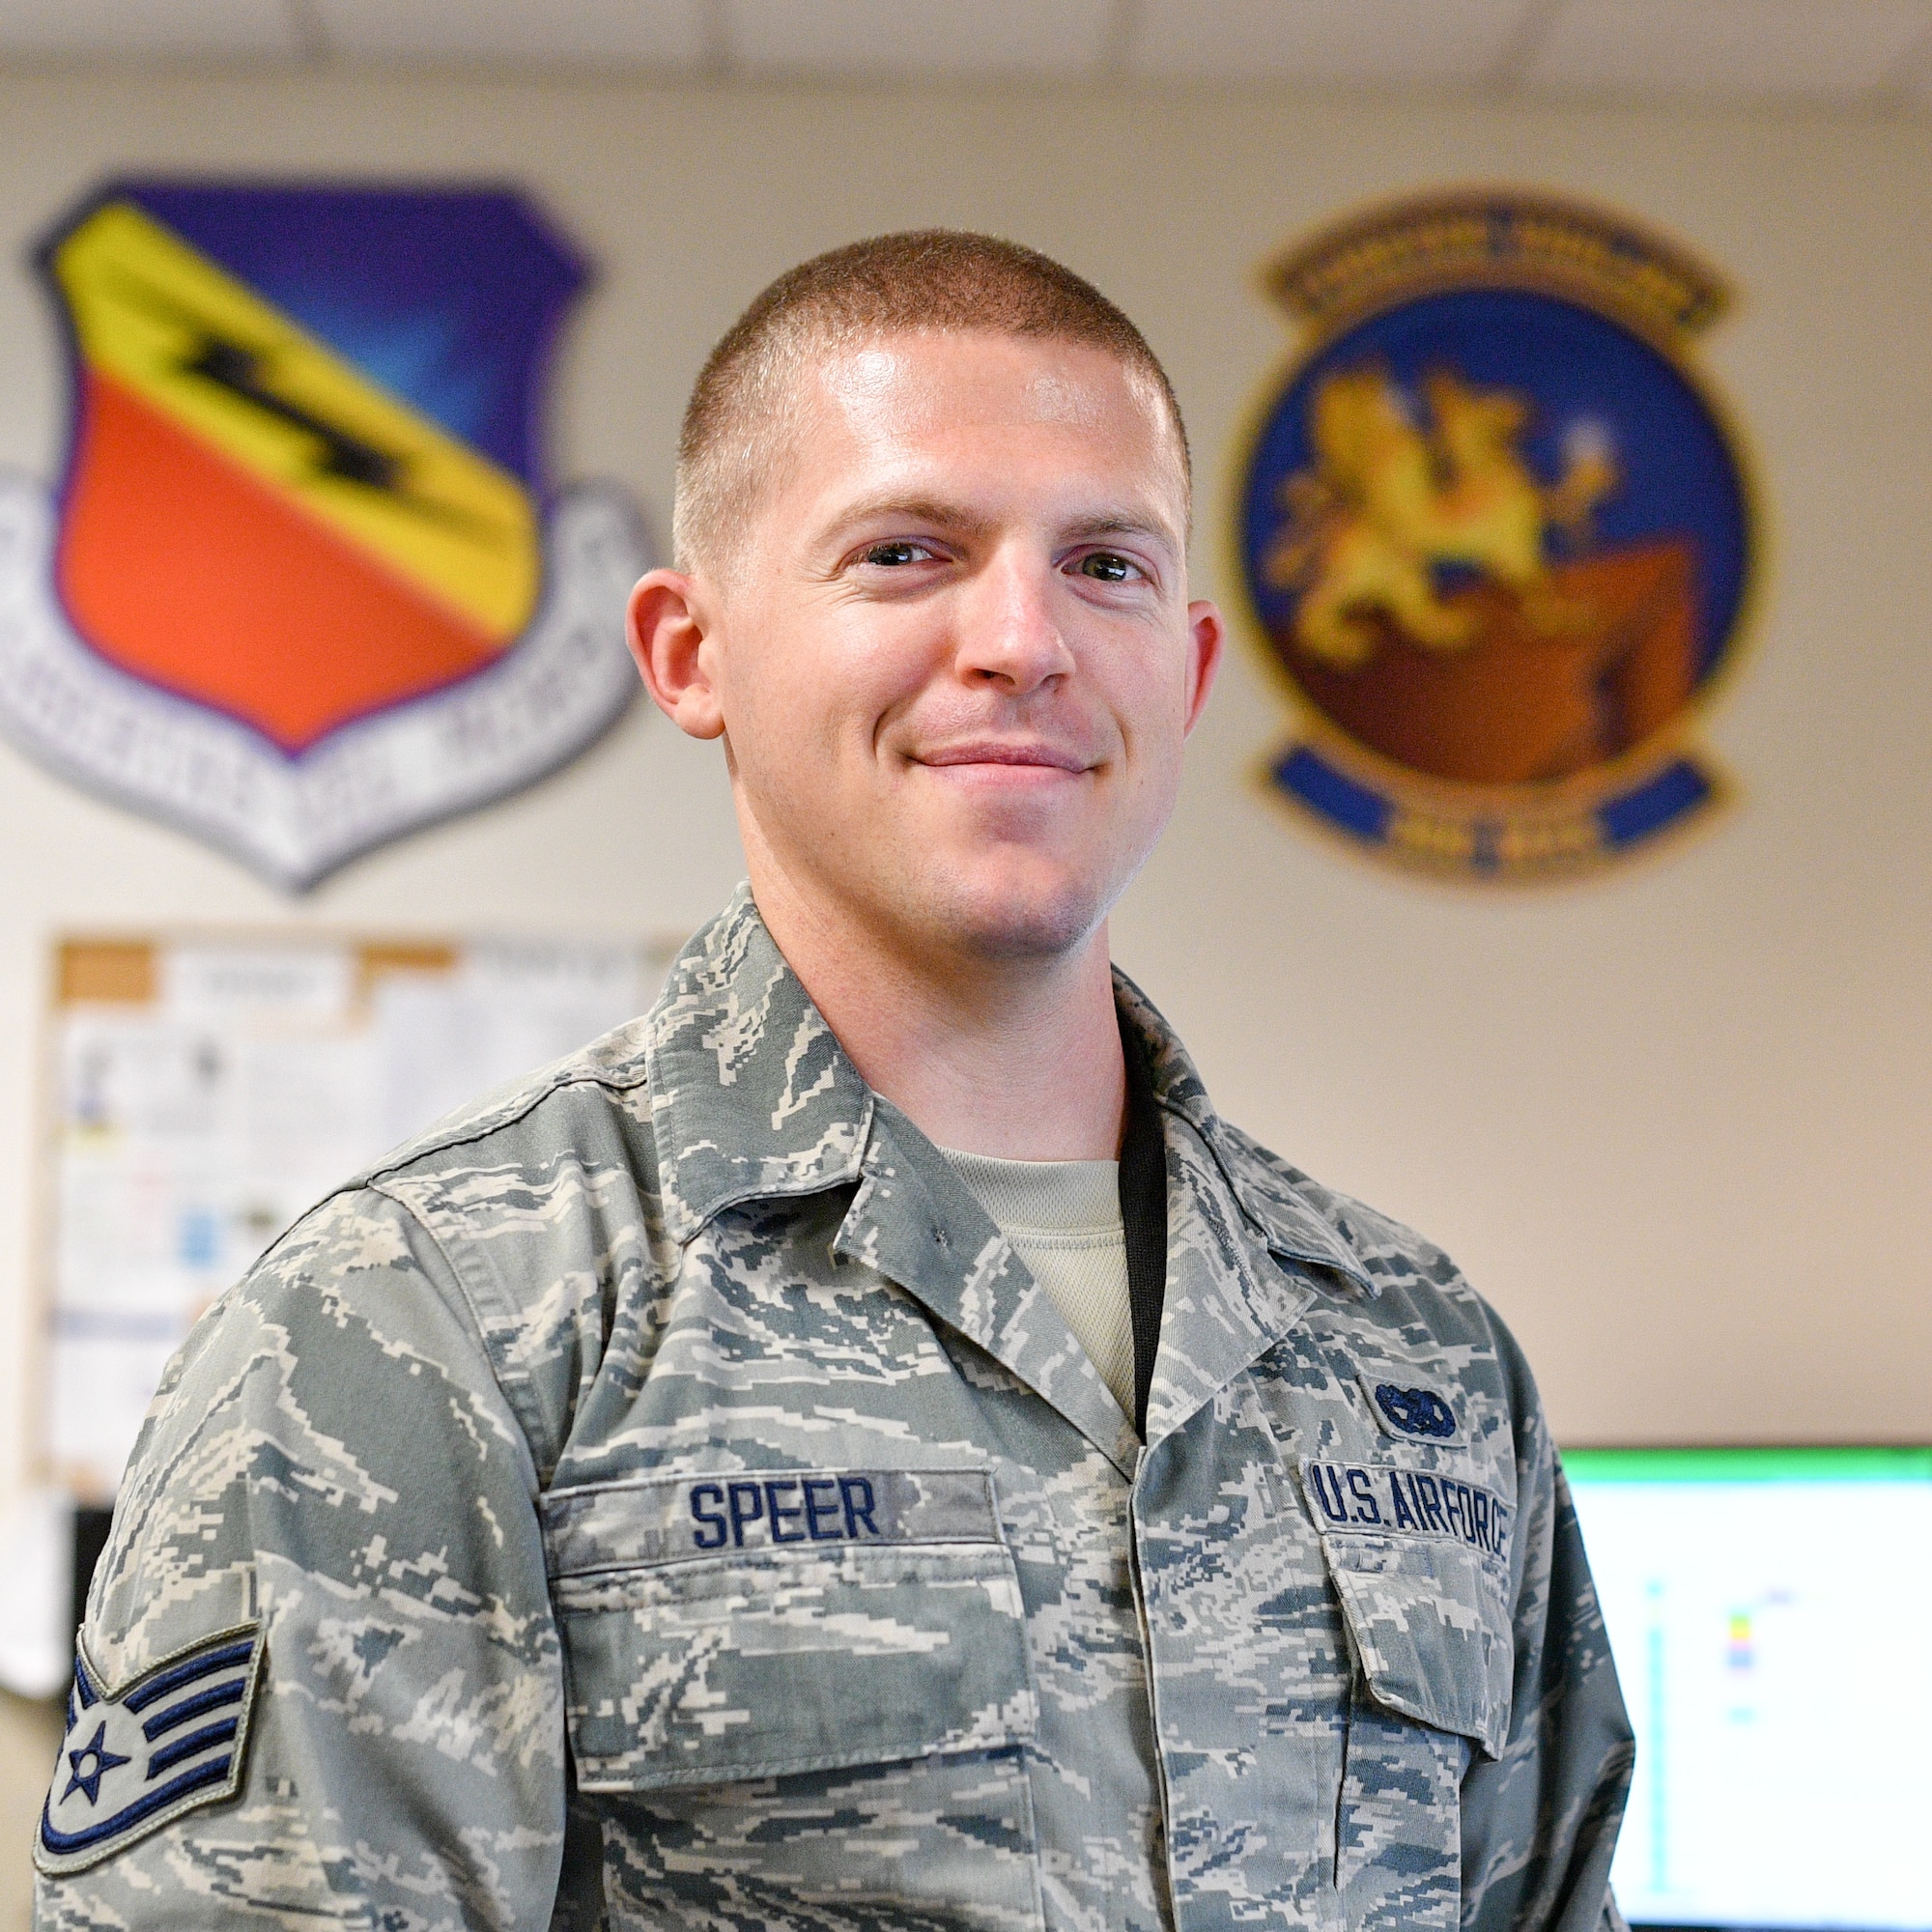 Staff Sgt. Benjamin Speer was recently recognized as a “Superior Performer” by the Hill AFB Top 3. 
Speer is a senior weapons system coordinator assigned to the 388th Maintenance Group and is from Statesville, N.C.